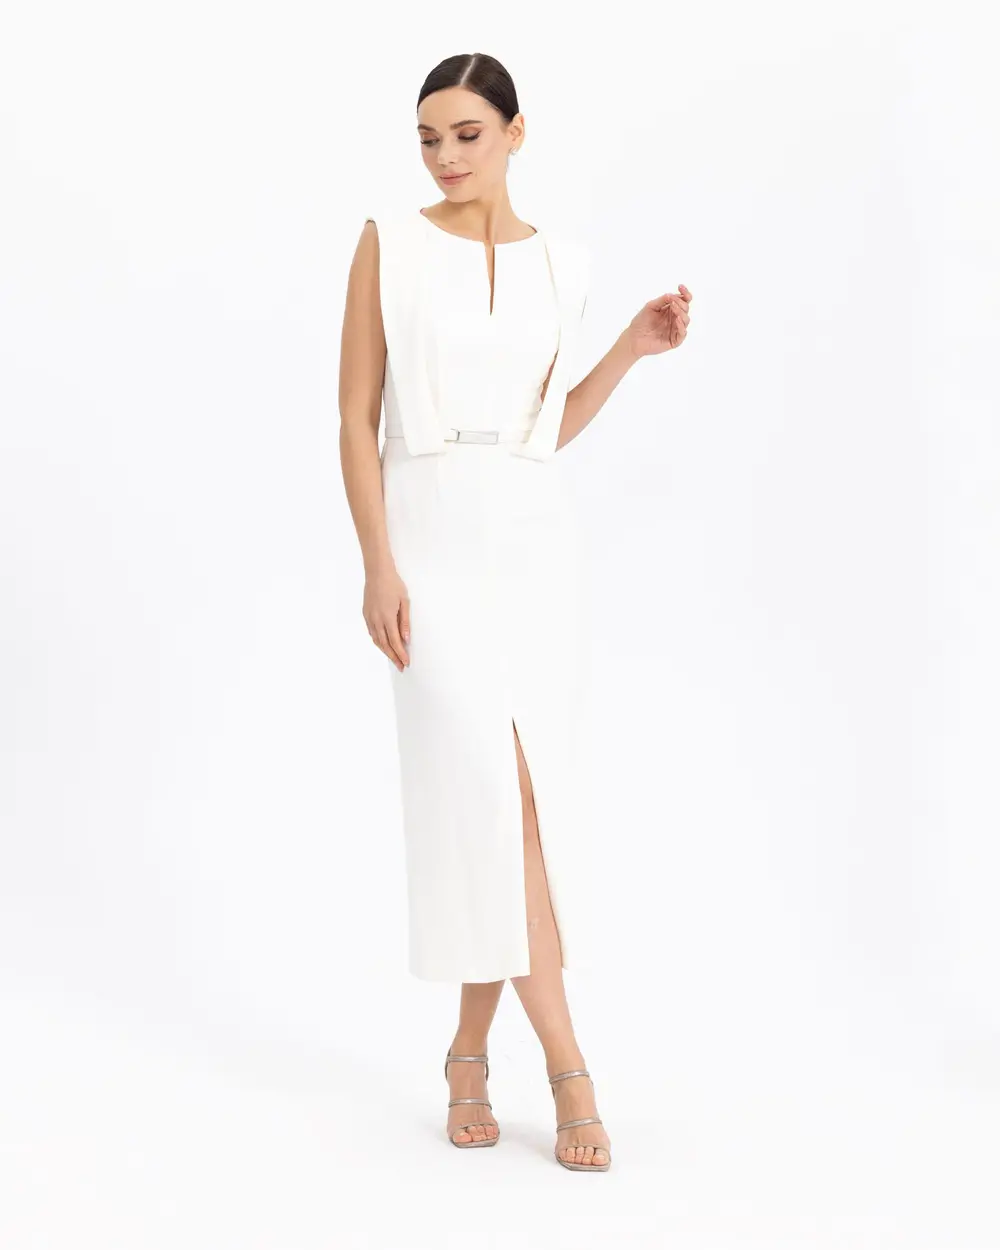  BELTED SLEEVE DETAILED NARROW FORM EVENING DRESS